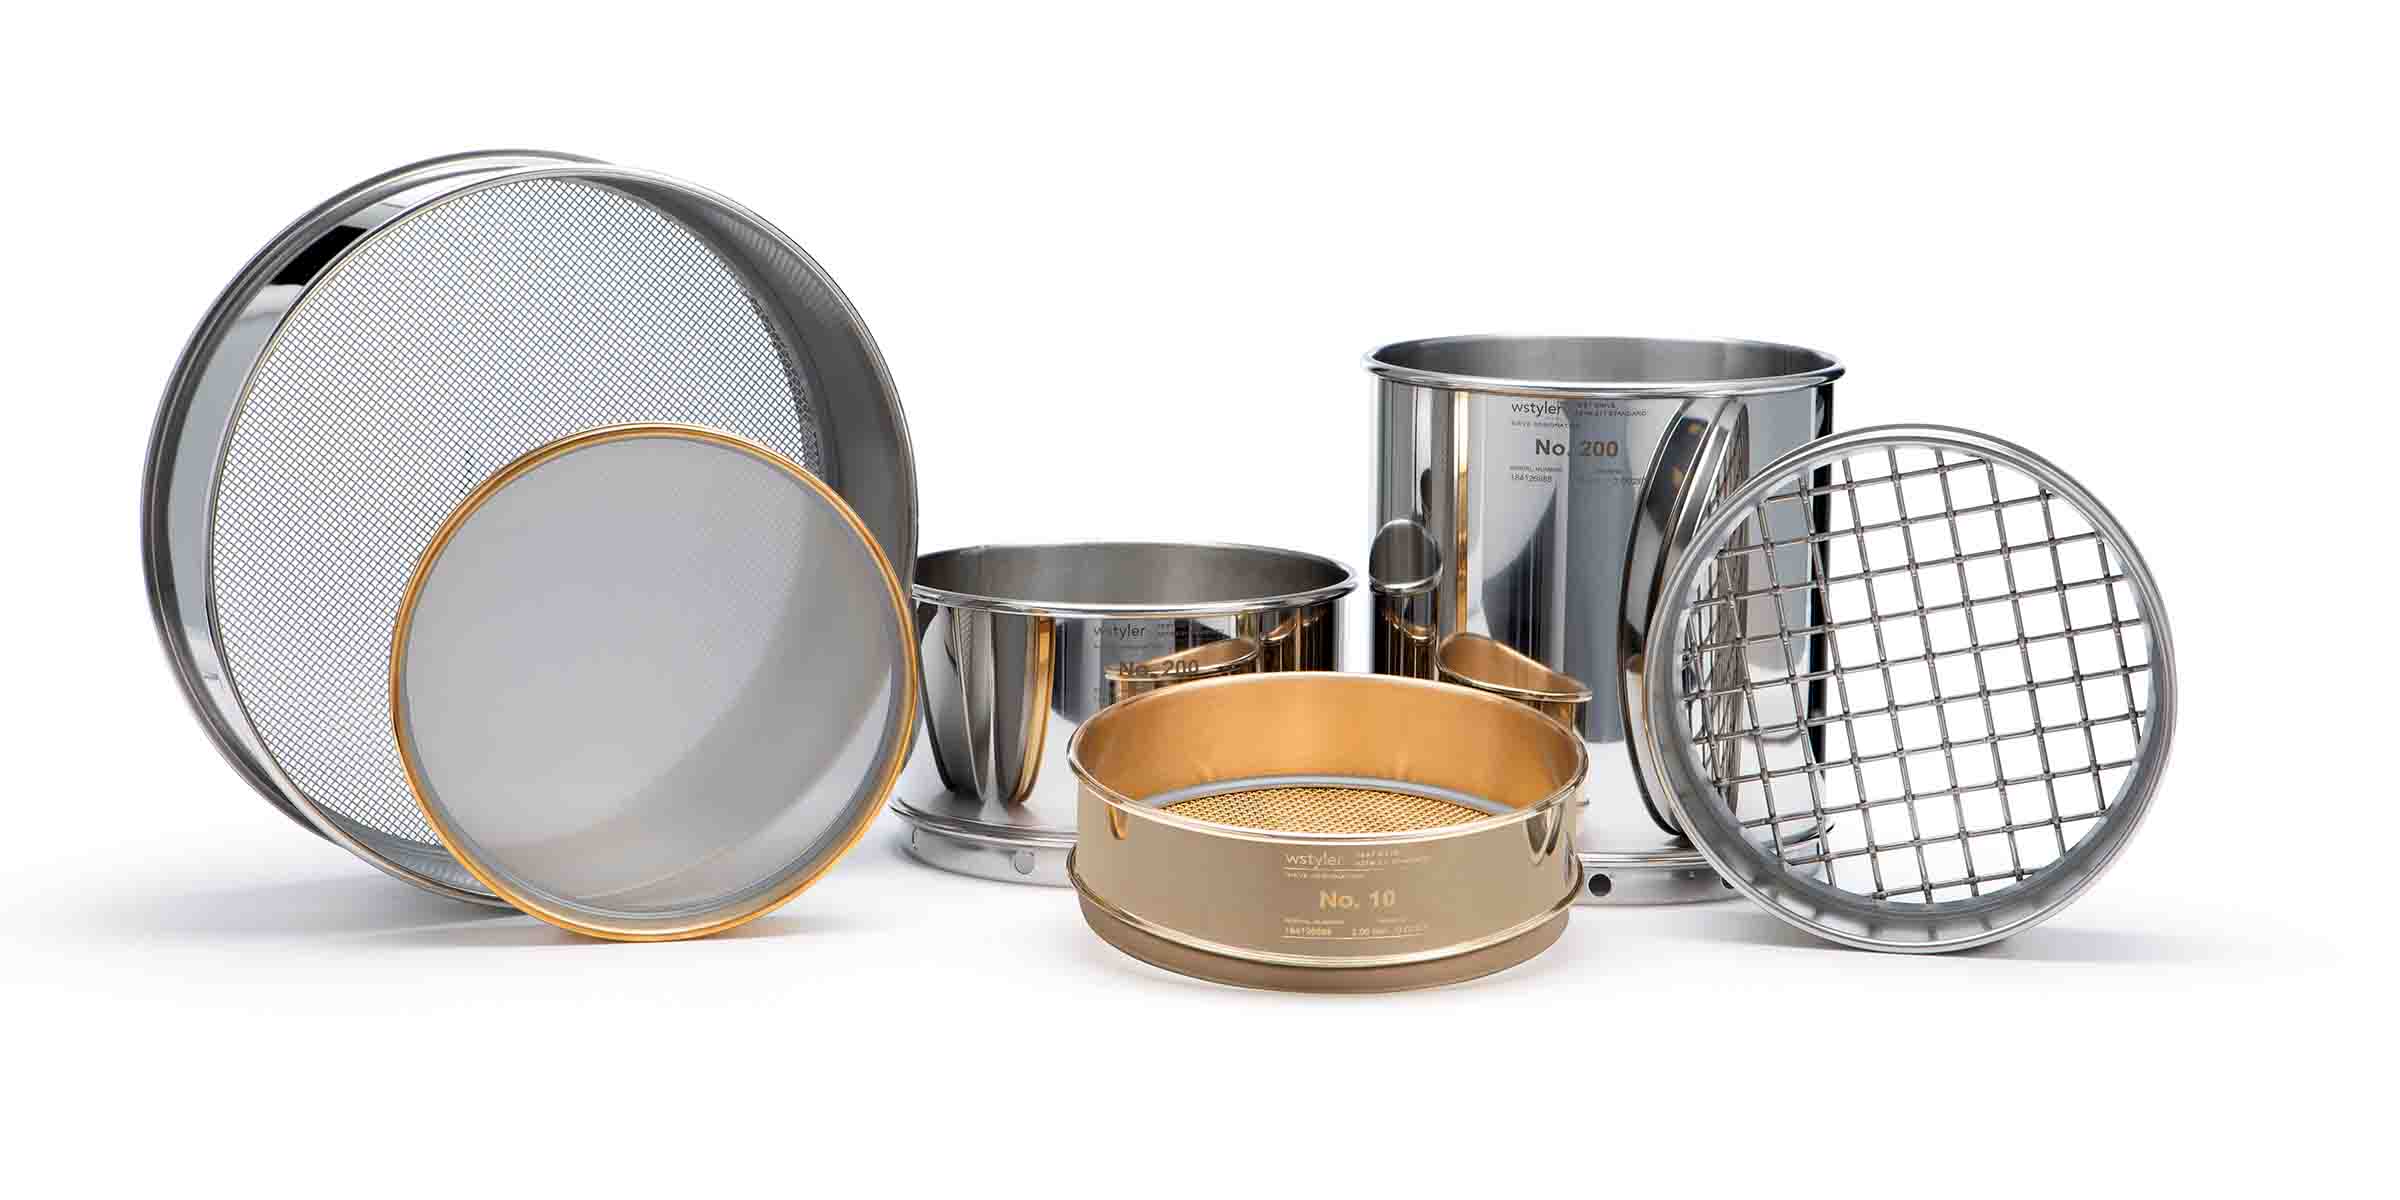 Why New Test Sieves Produce Results Inconsistent With Old Test Sieves